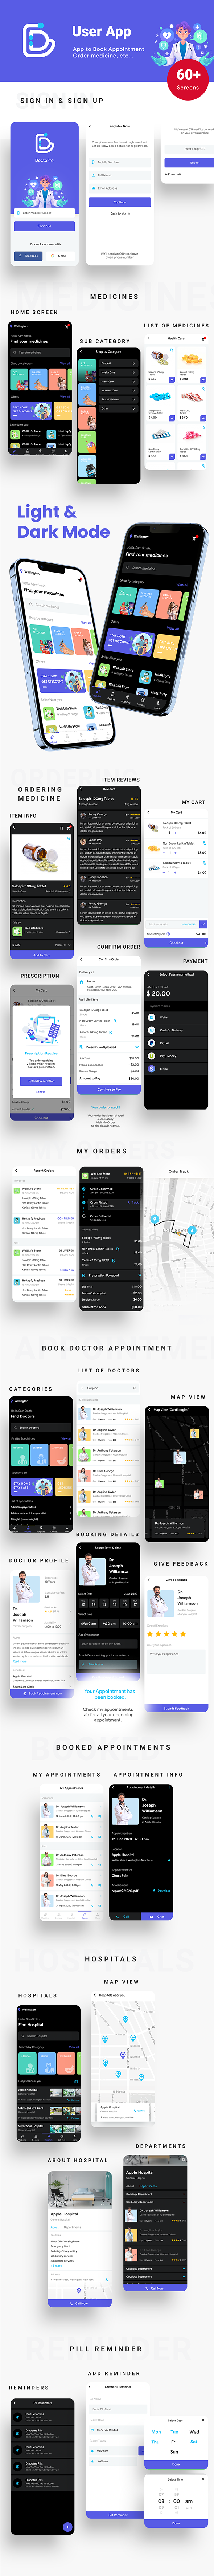 17 Template| Doctor Appointment Booking| Hospital management POS system| Medicine Delivery| Doctopro - 6